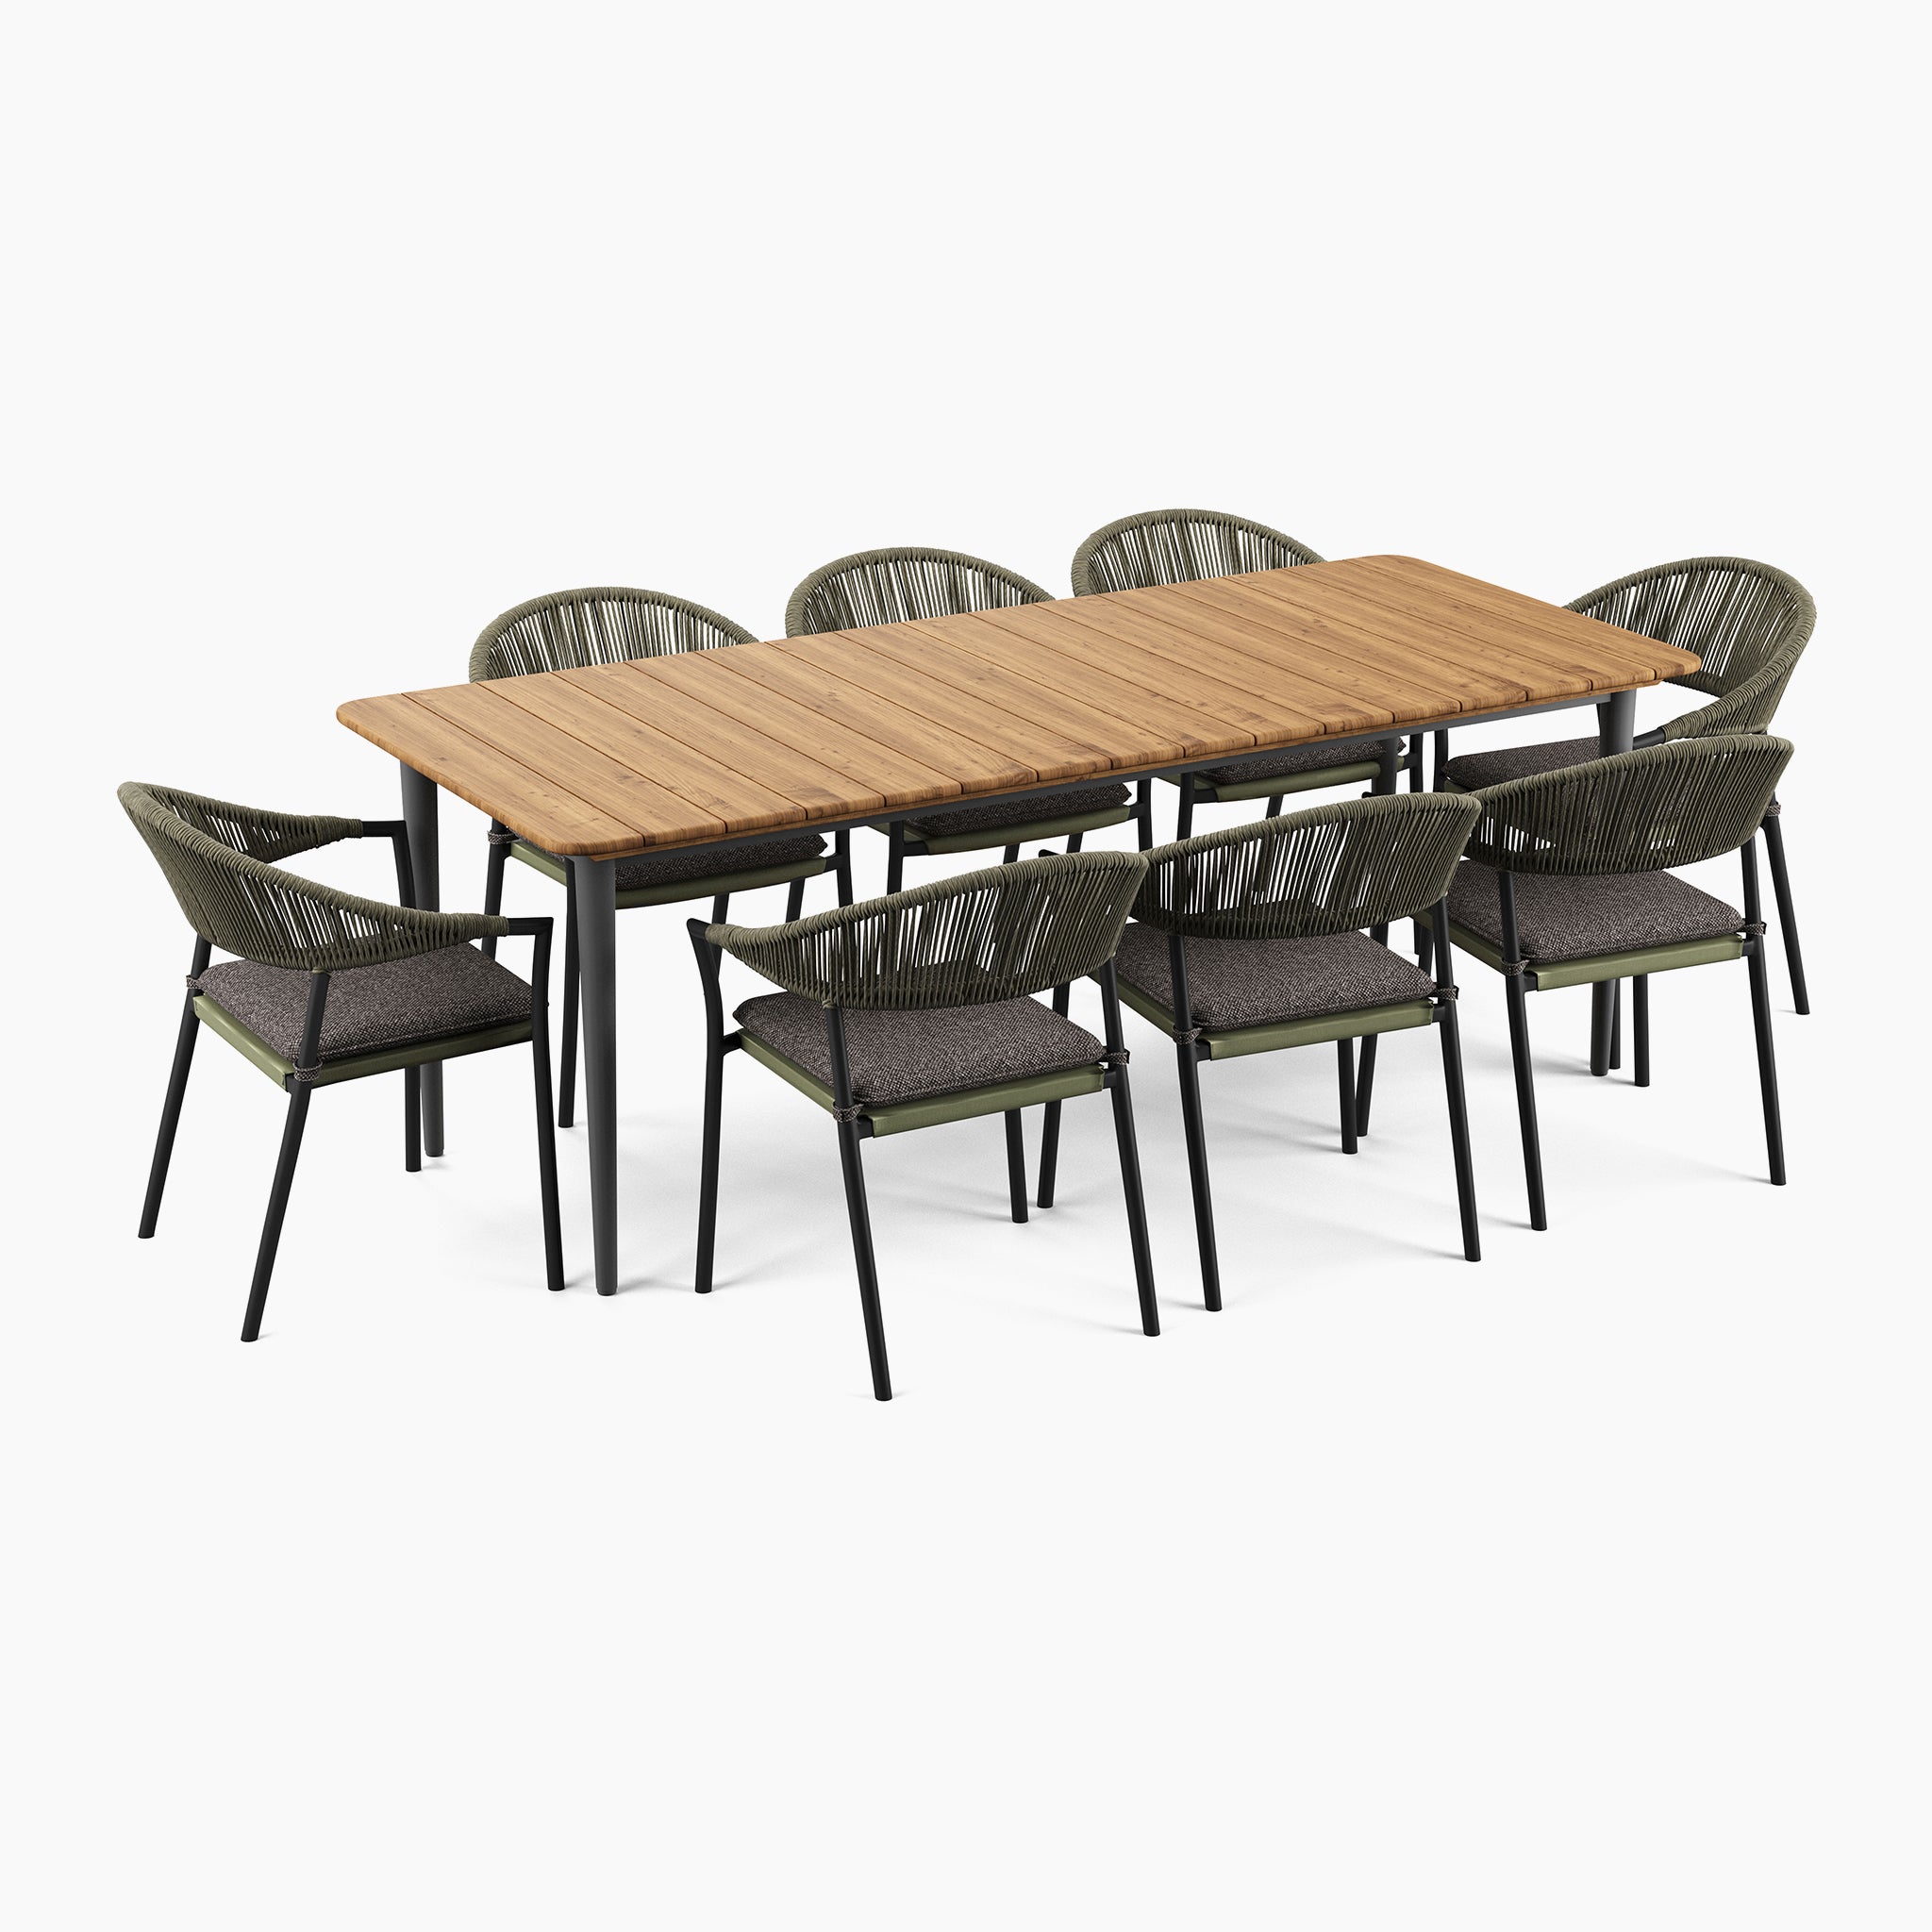 Cloverly 8 Seat Rectangular Dining with Teak Table in Green